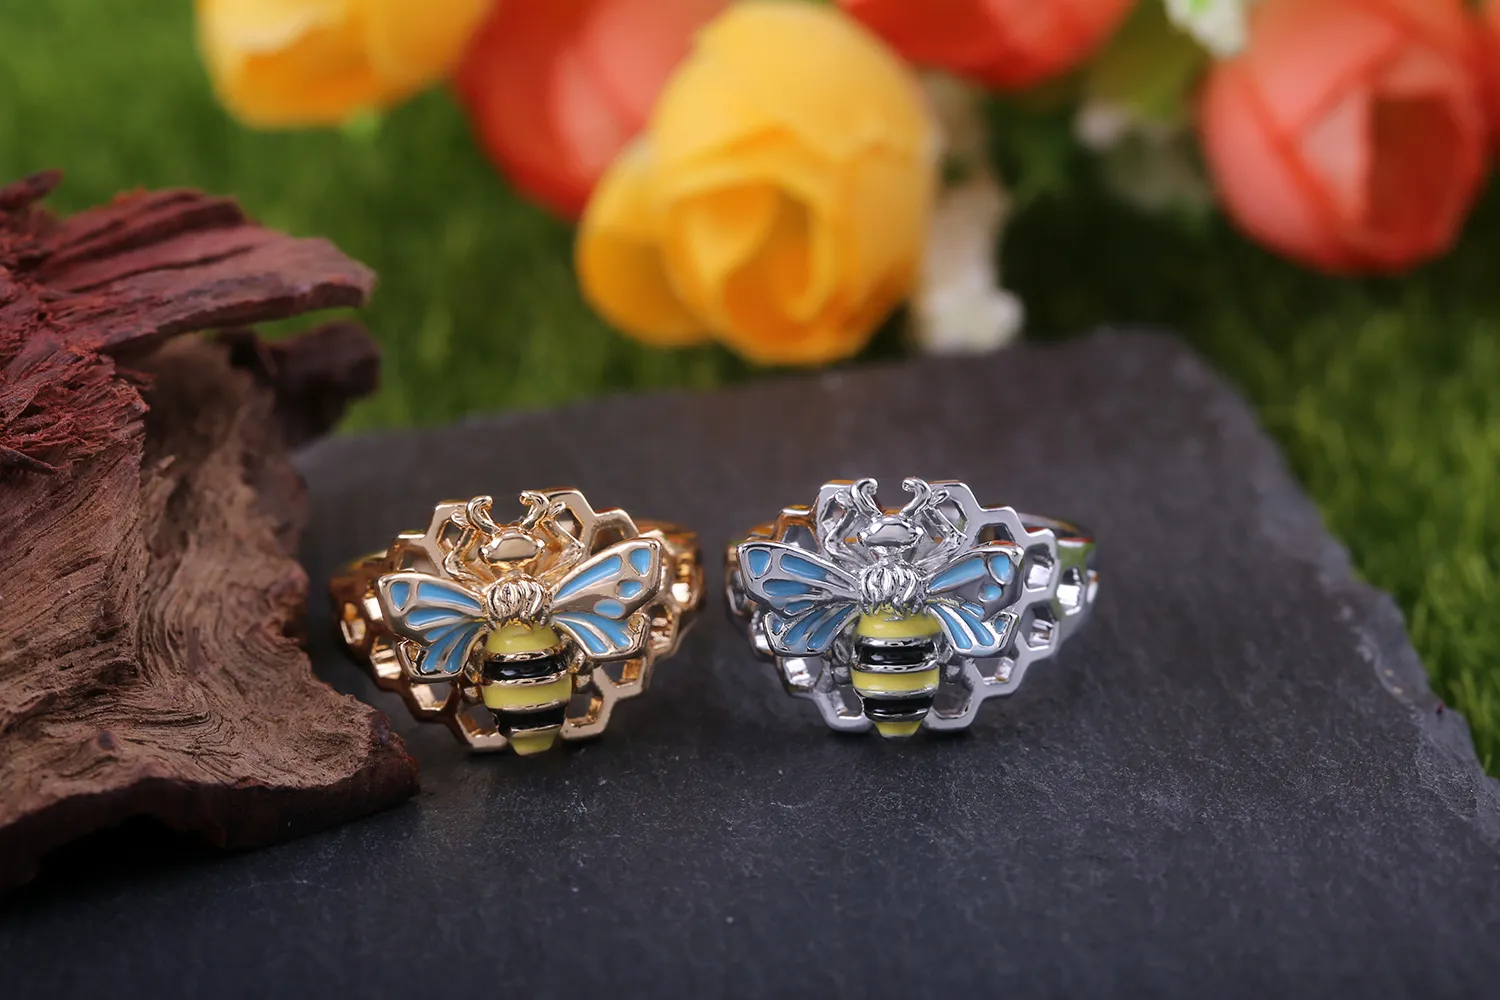 Wholesale- Creative Honeybee Party Ring Bee Staying On The Honeycomb Design Gold Silver Plated Cute Birthday Gift Accessories Ring